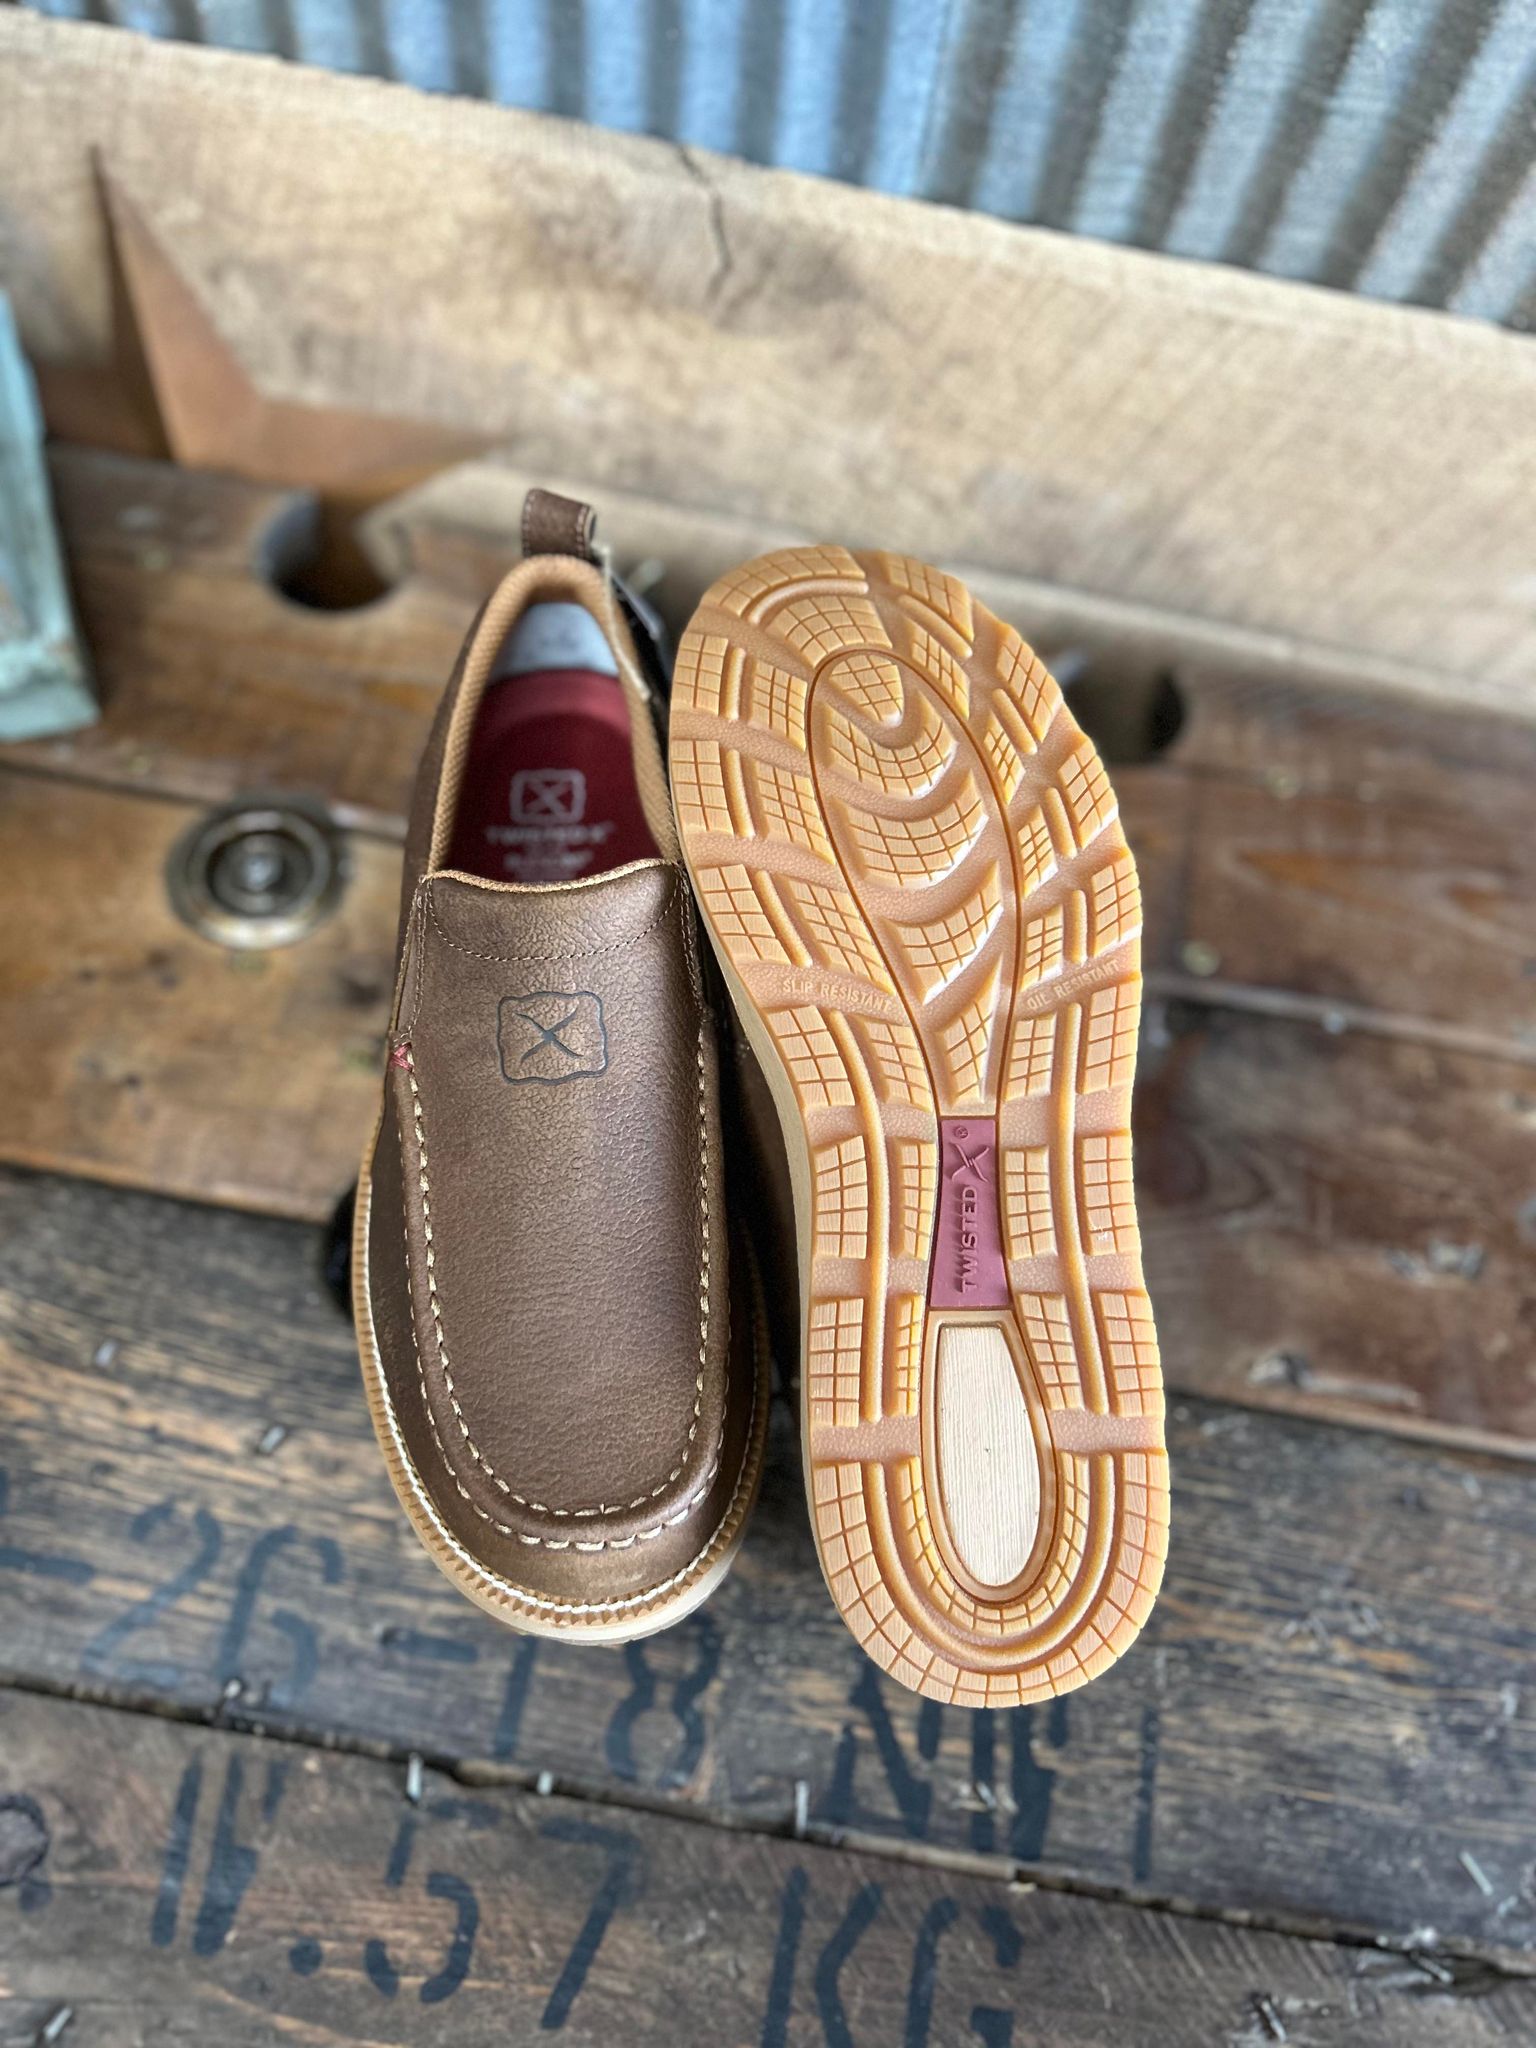 Men's Twisted X Cell Stretch Slip On - Tawny Brown-Men's Casual Shoes-Twisted X Boots-Lucky J Boots & More, Women's, Men's, & Kids Western Store Located in Carthage, MO